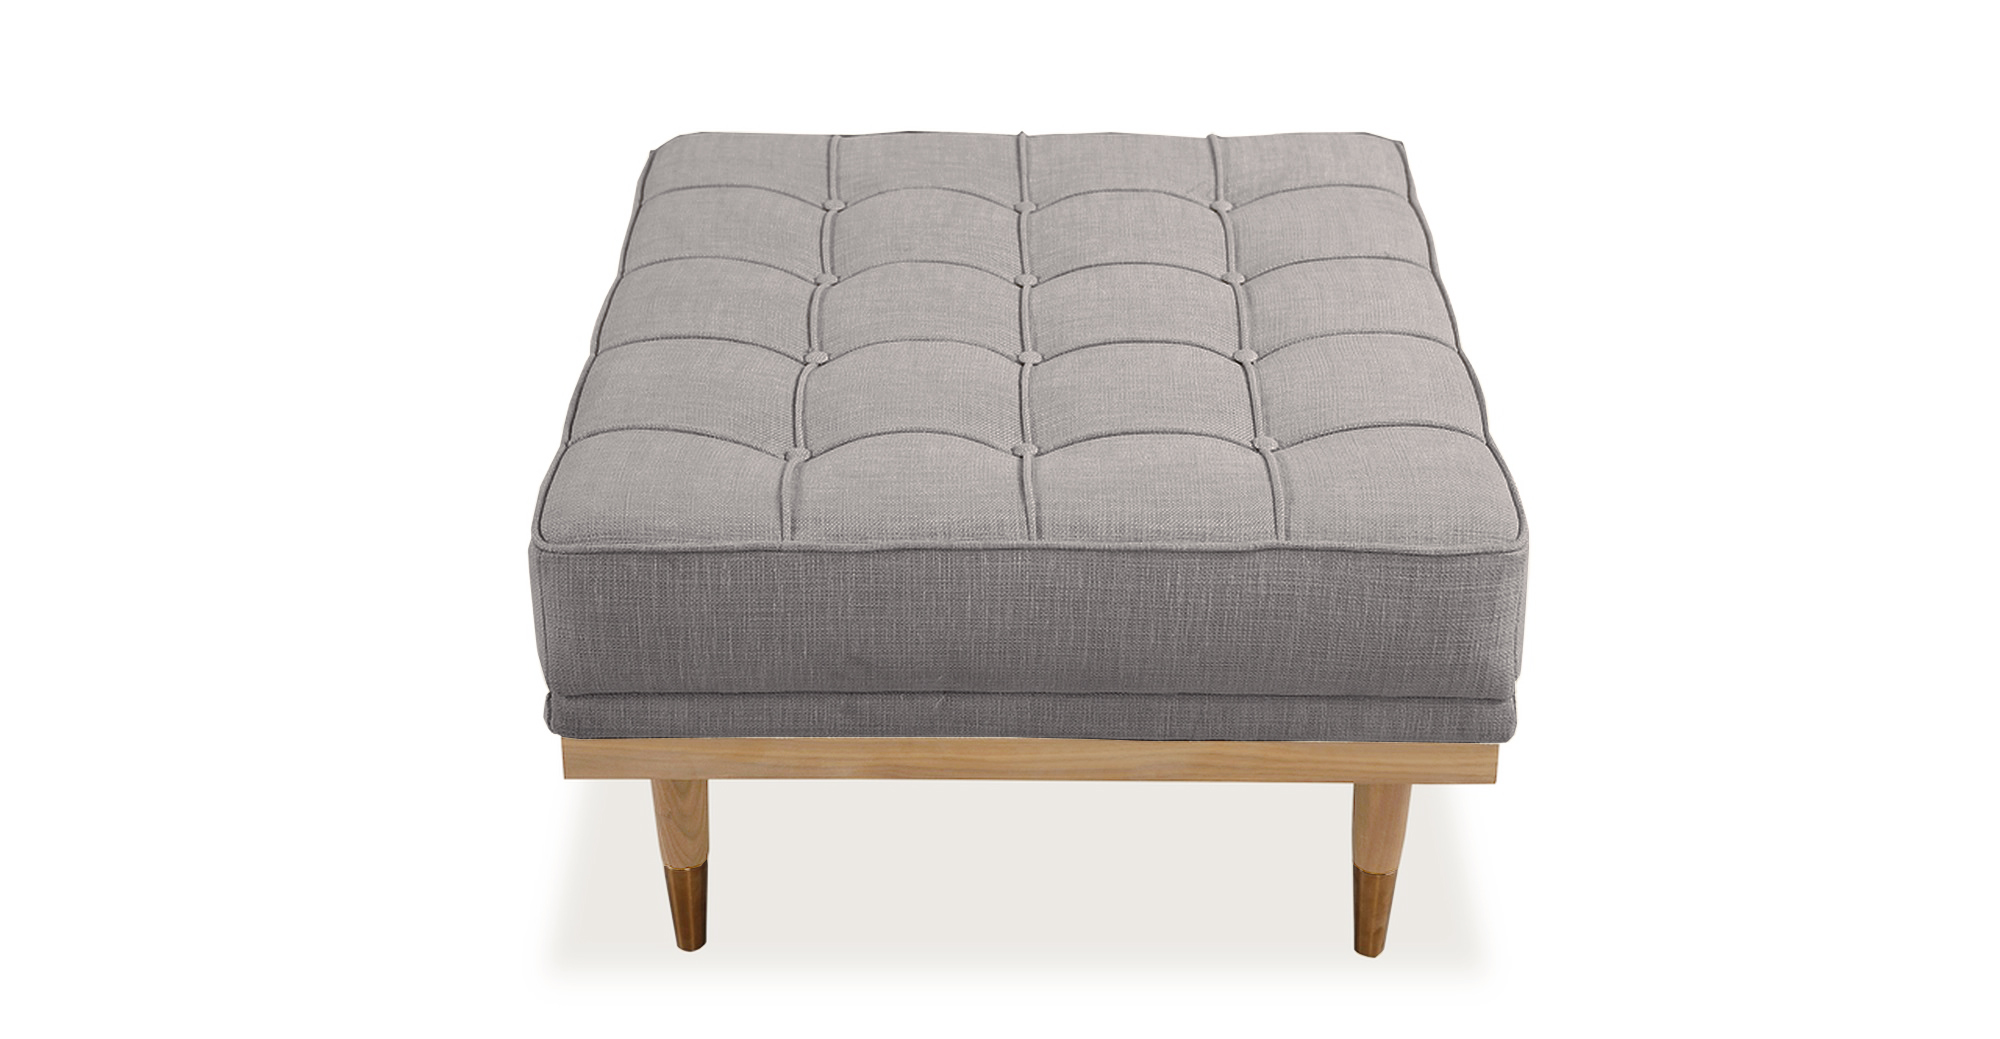 Image shows top view of Mid-Century Modern Woodrow Box Ottoman in Urban Hemp Vintage Tailored Twill. Frame and legs are natural ash wood. Legs are brass tipped ash wood. The cushion is button tufted. 